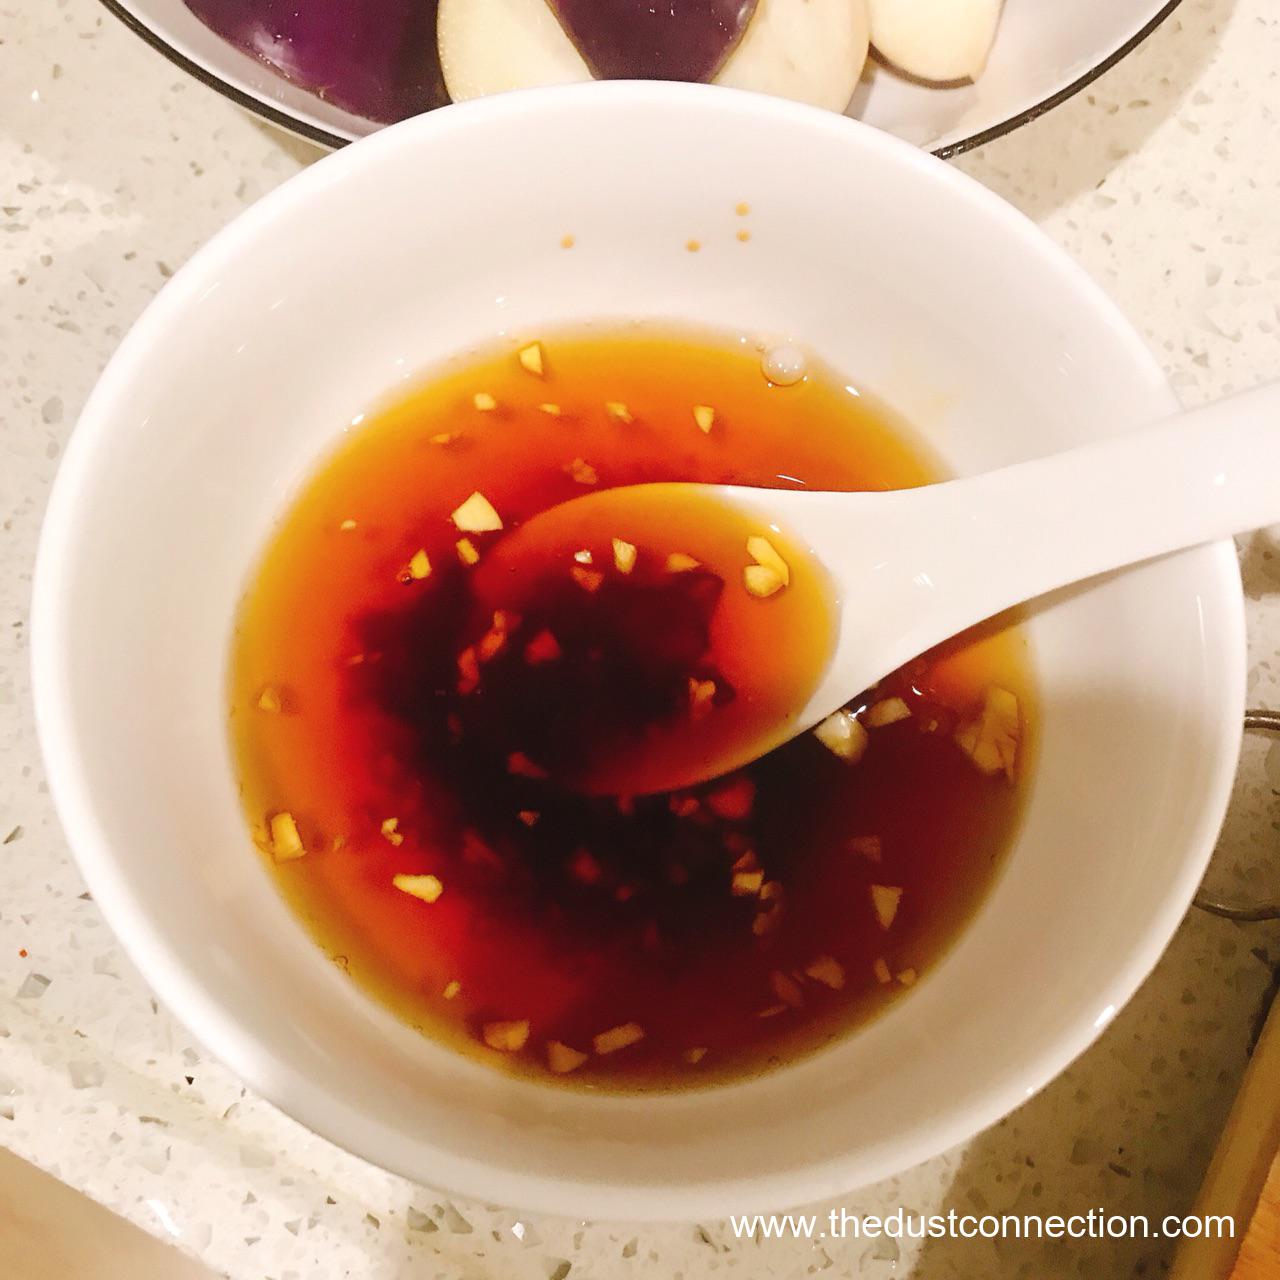 In a small bowl, whisk together the light soy sauce, sugar, oyster sauce, and cornstarch until smooth